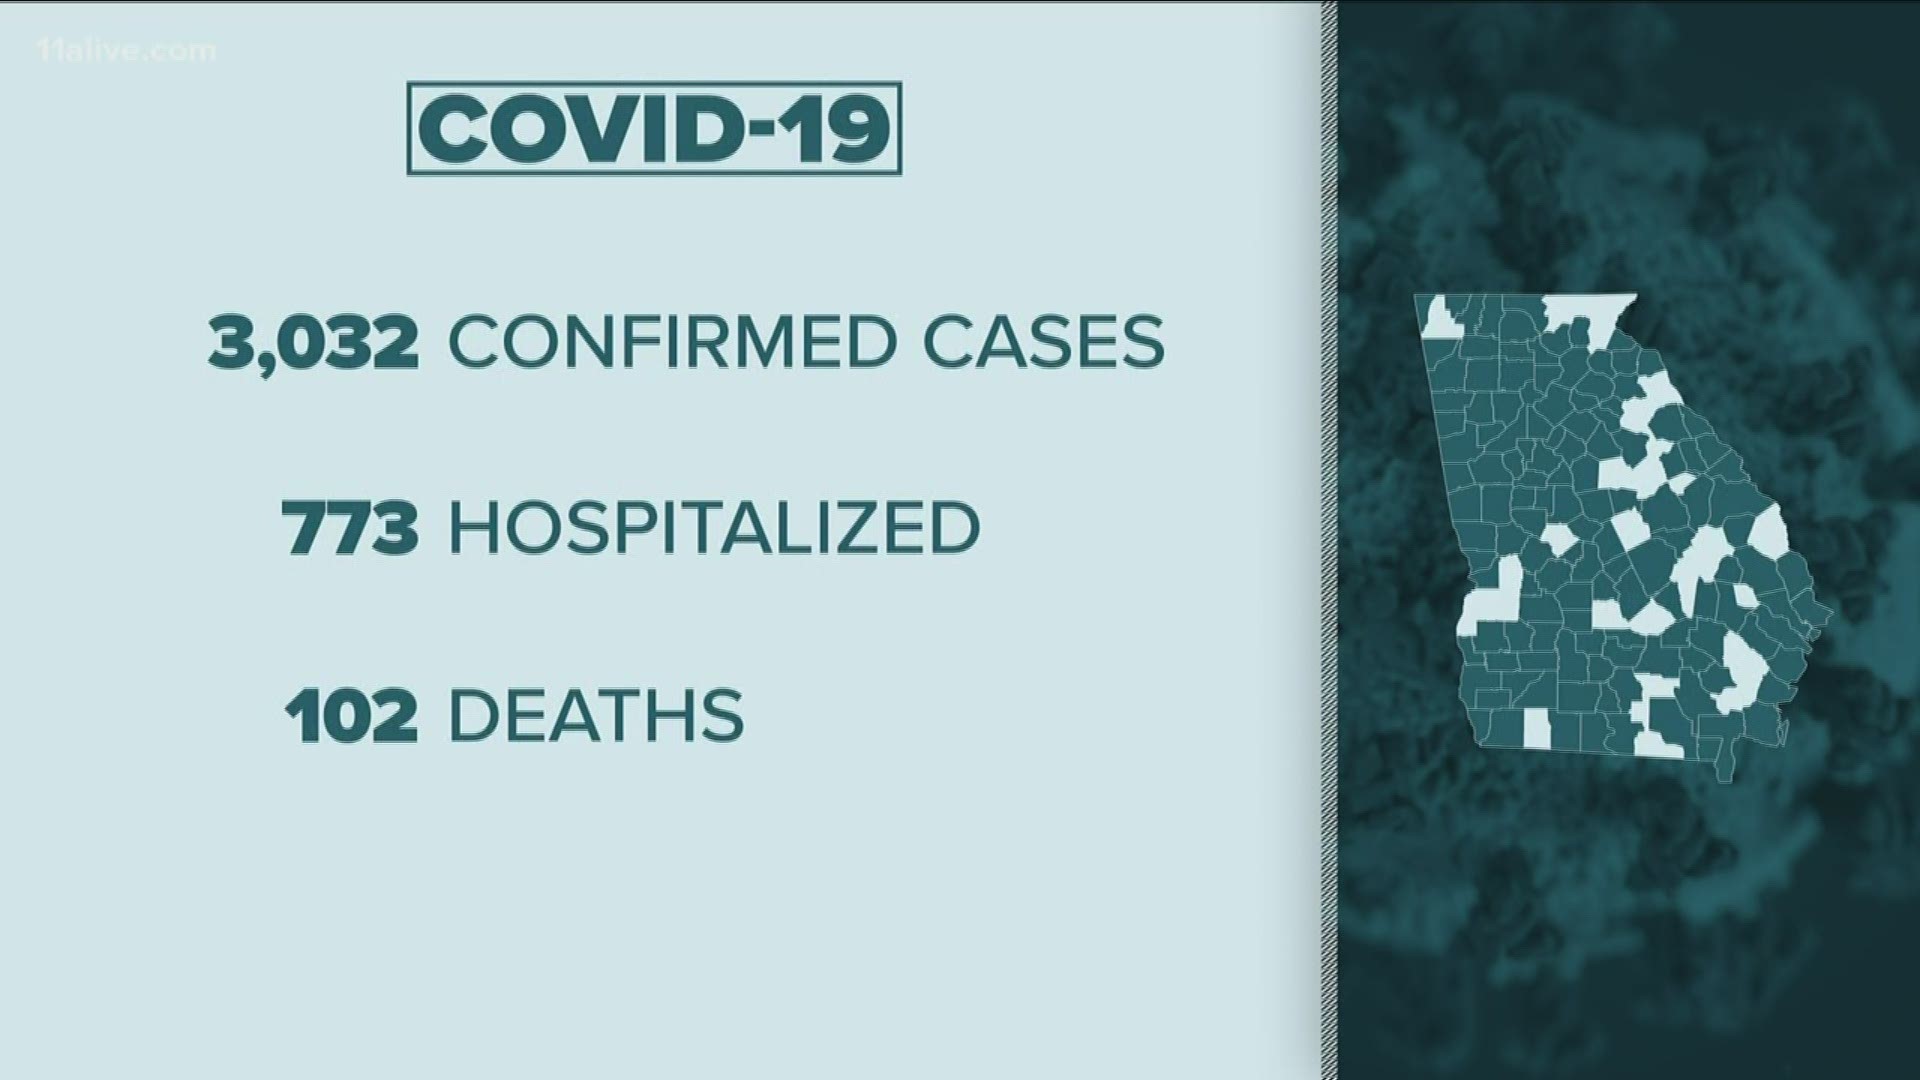 Here is a look at the COVID-19 cases in the state.